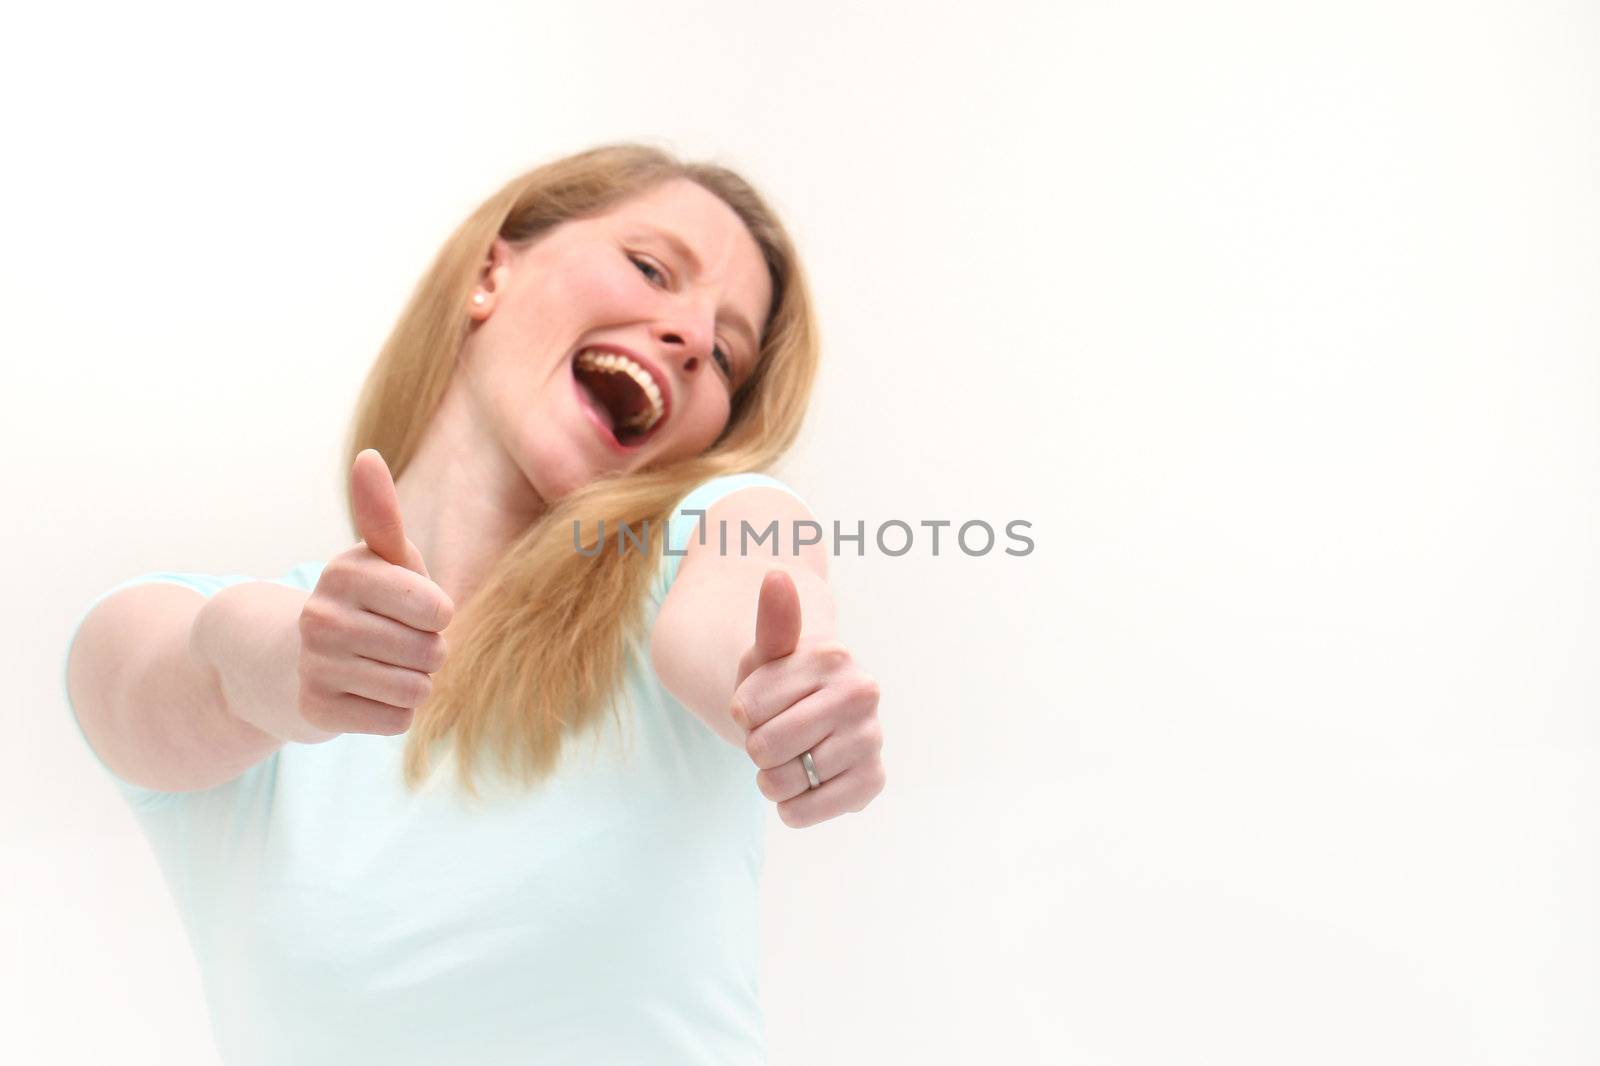 Enthusiastic woman giving thumbs up by Farina6000